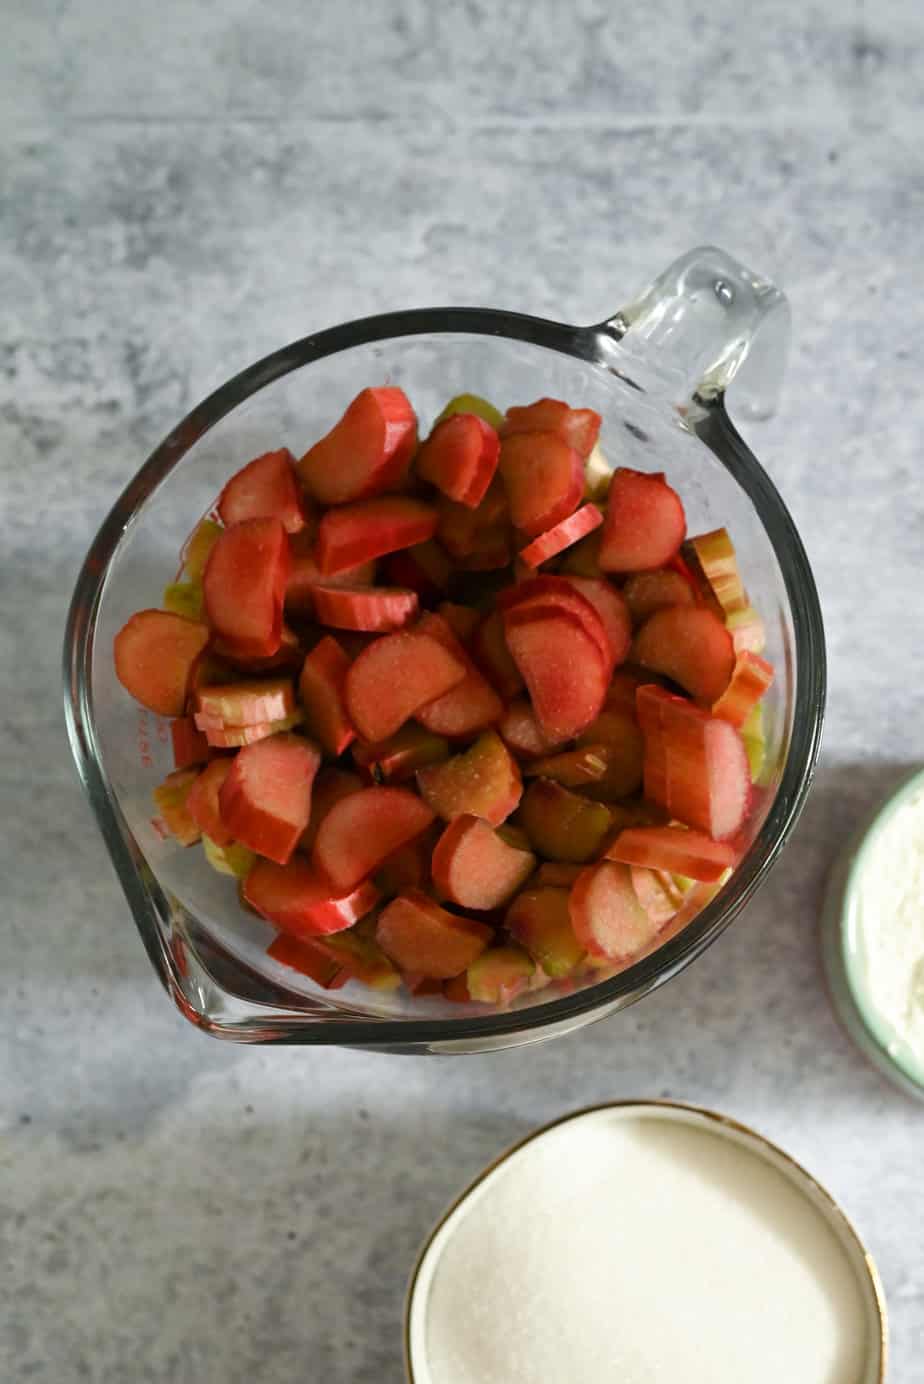 Chopped rhubarb in a large glass measuring cup, set on a gray countertop.